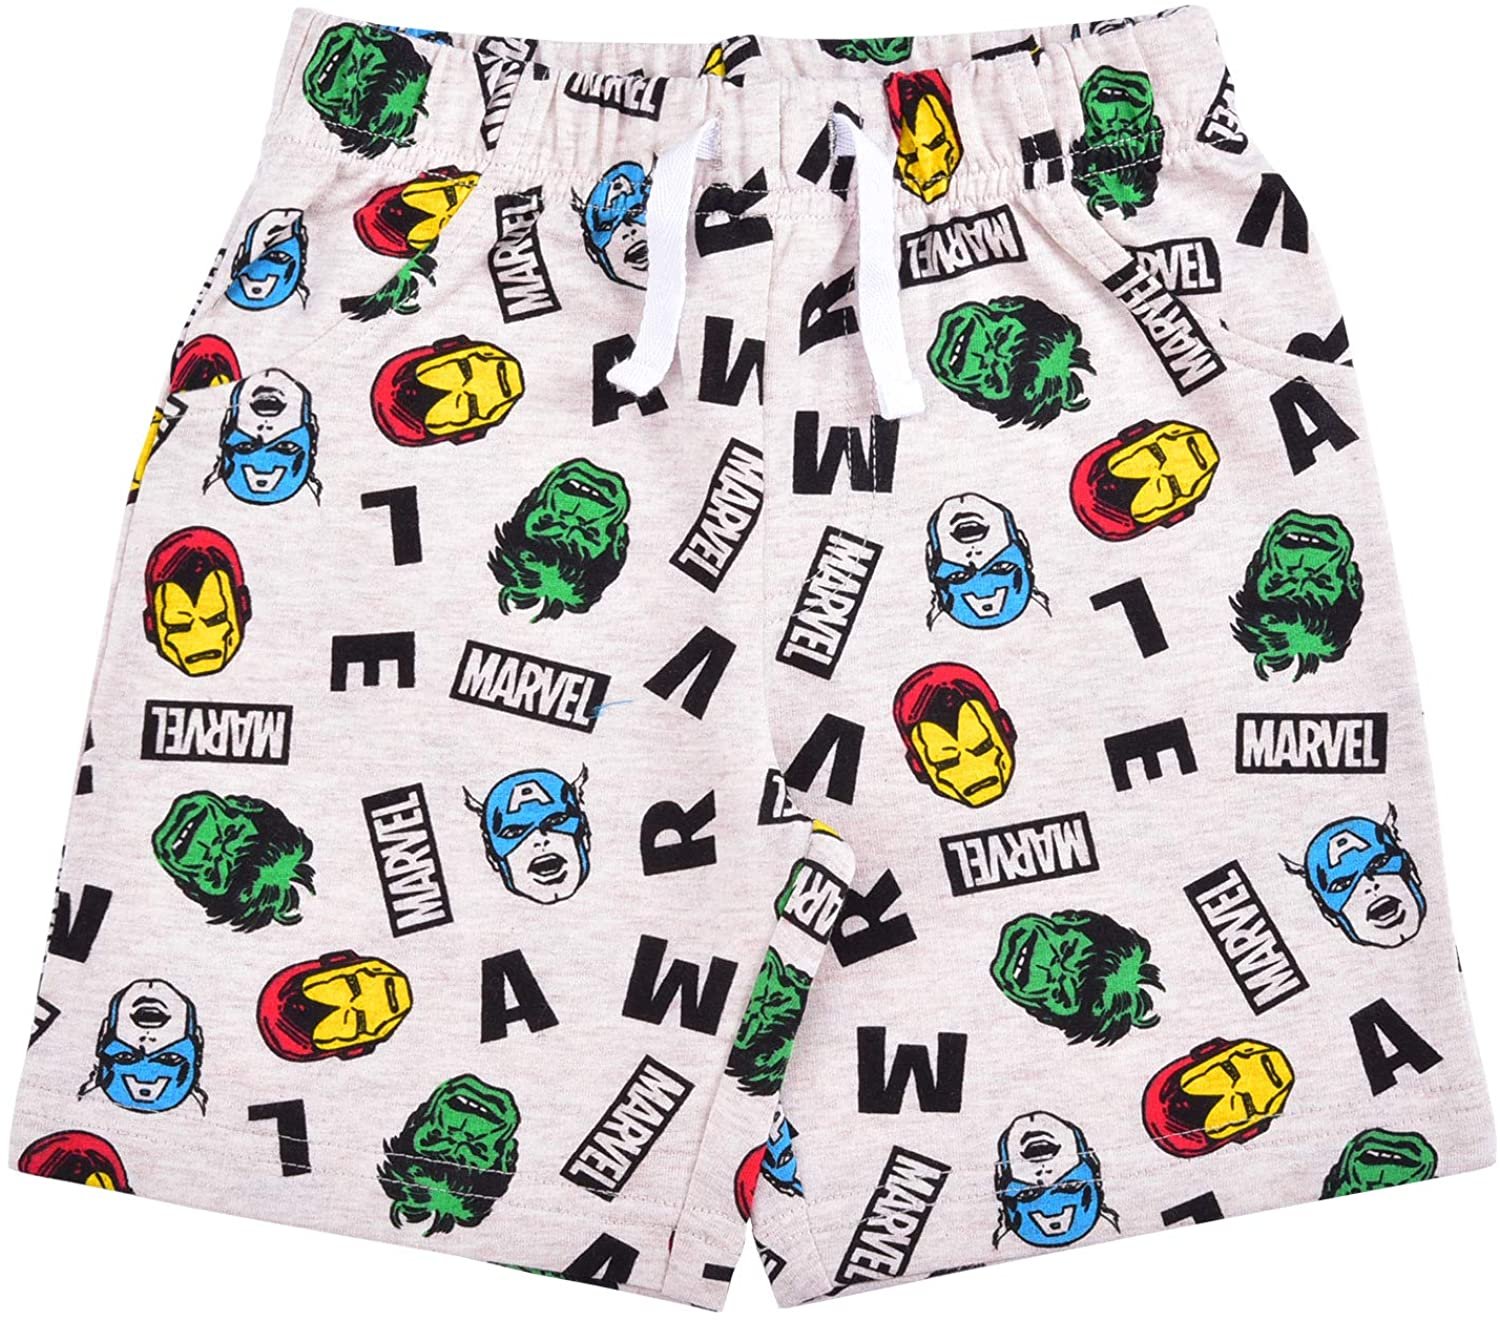 Marvel Superheroes 2 Pack Shorts Set for Boys, Ironman, Hulk and Captain America - image 2 of 5